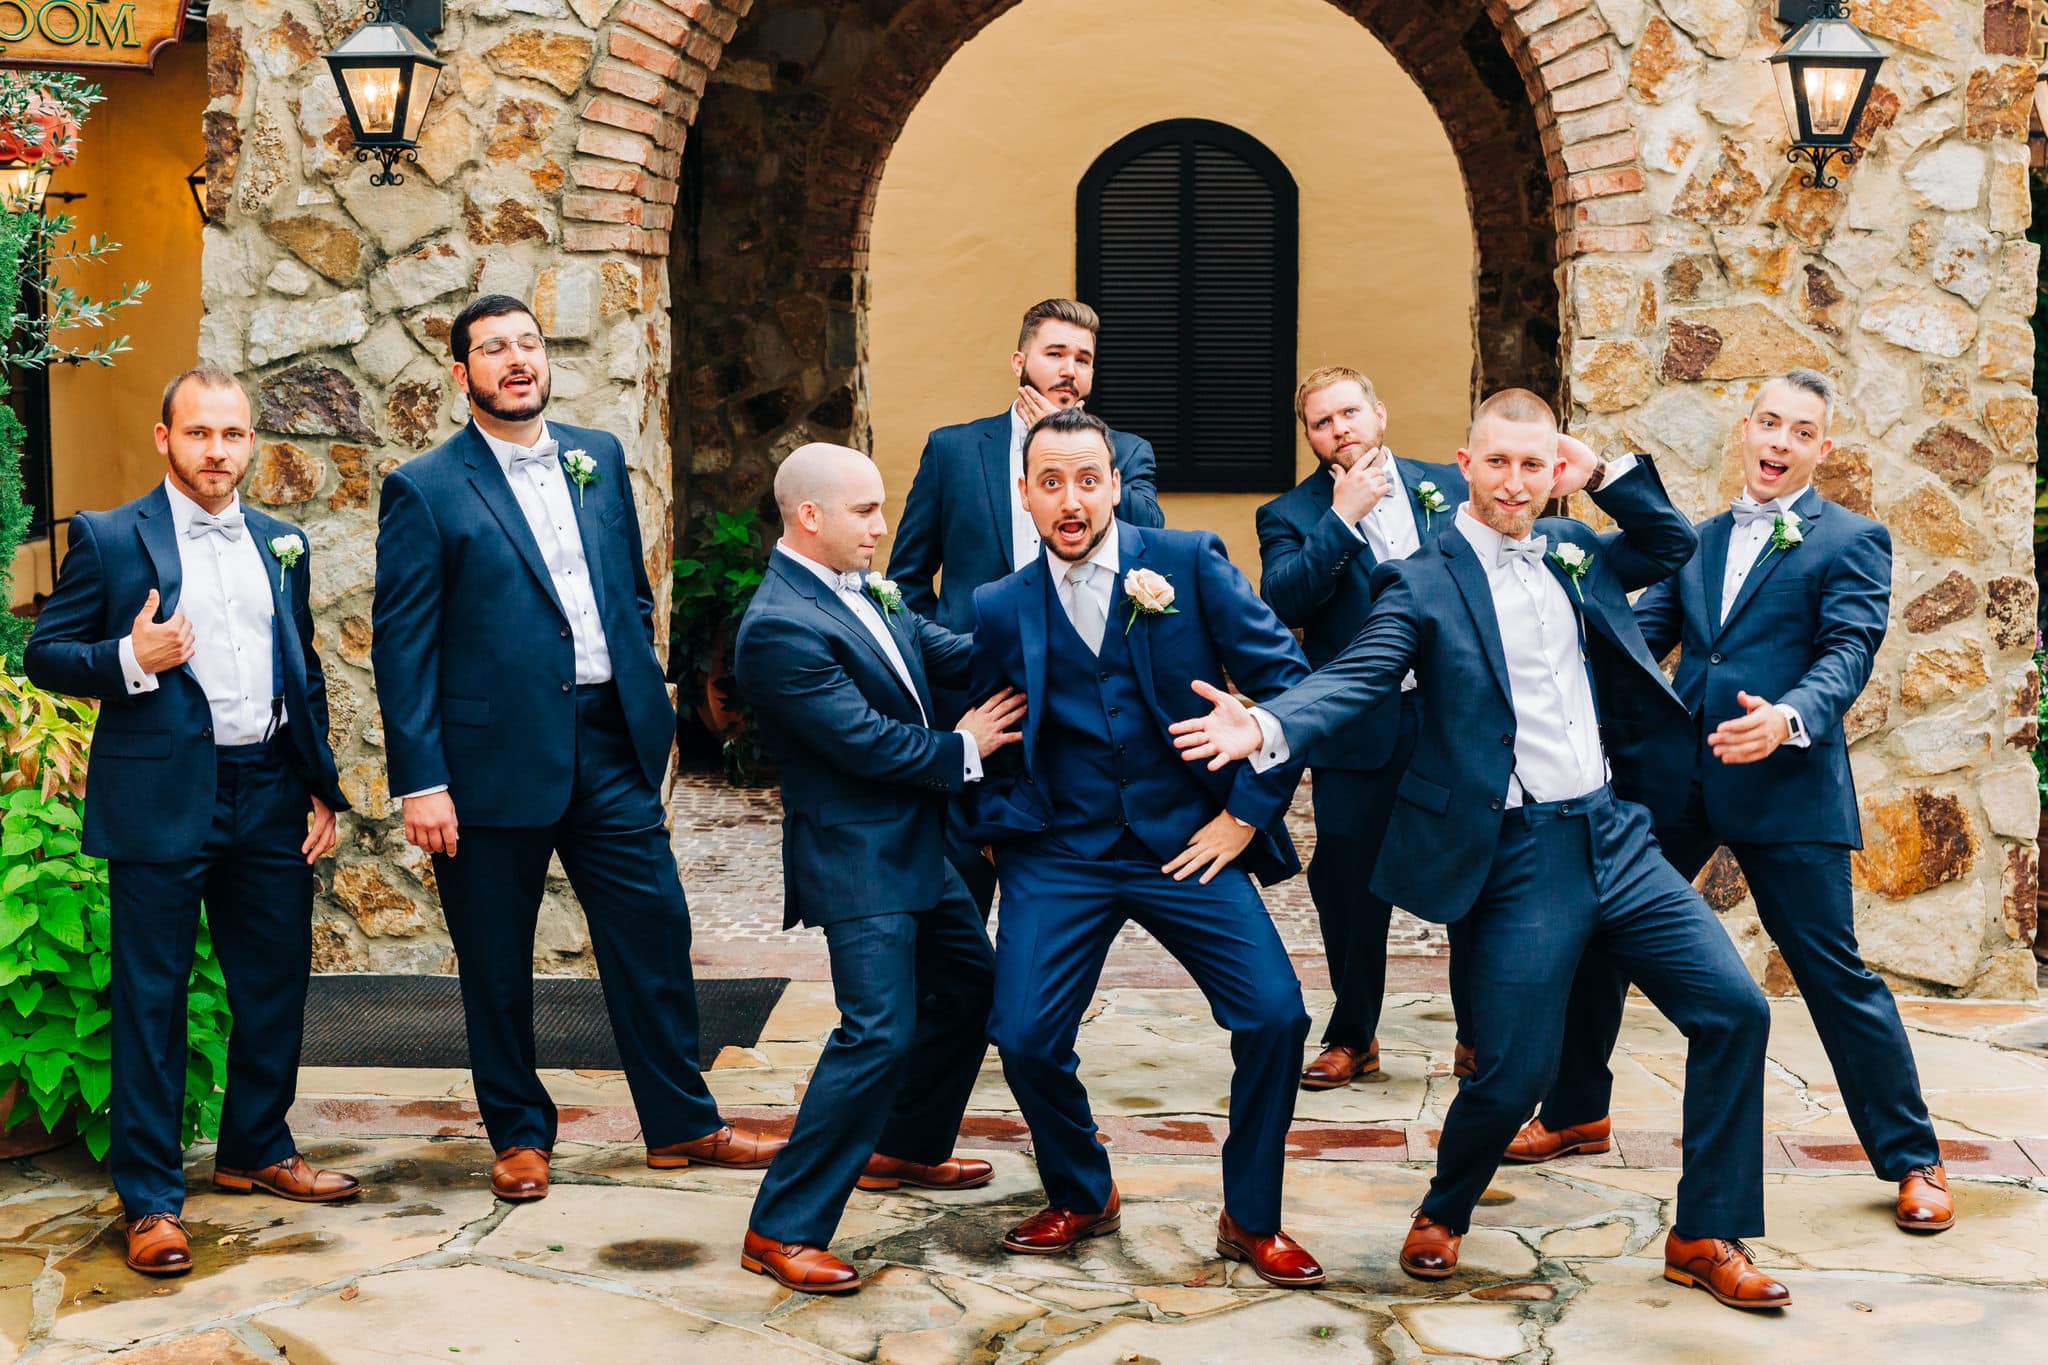 funny group shot of groom and groomsman in navy blue tuxes in front of stone archways 